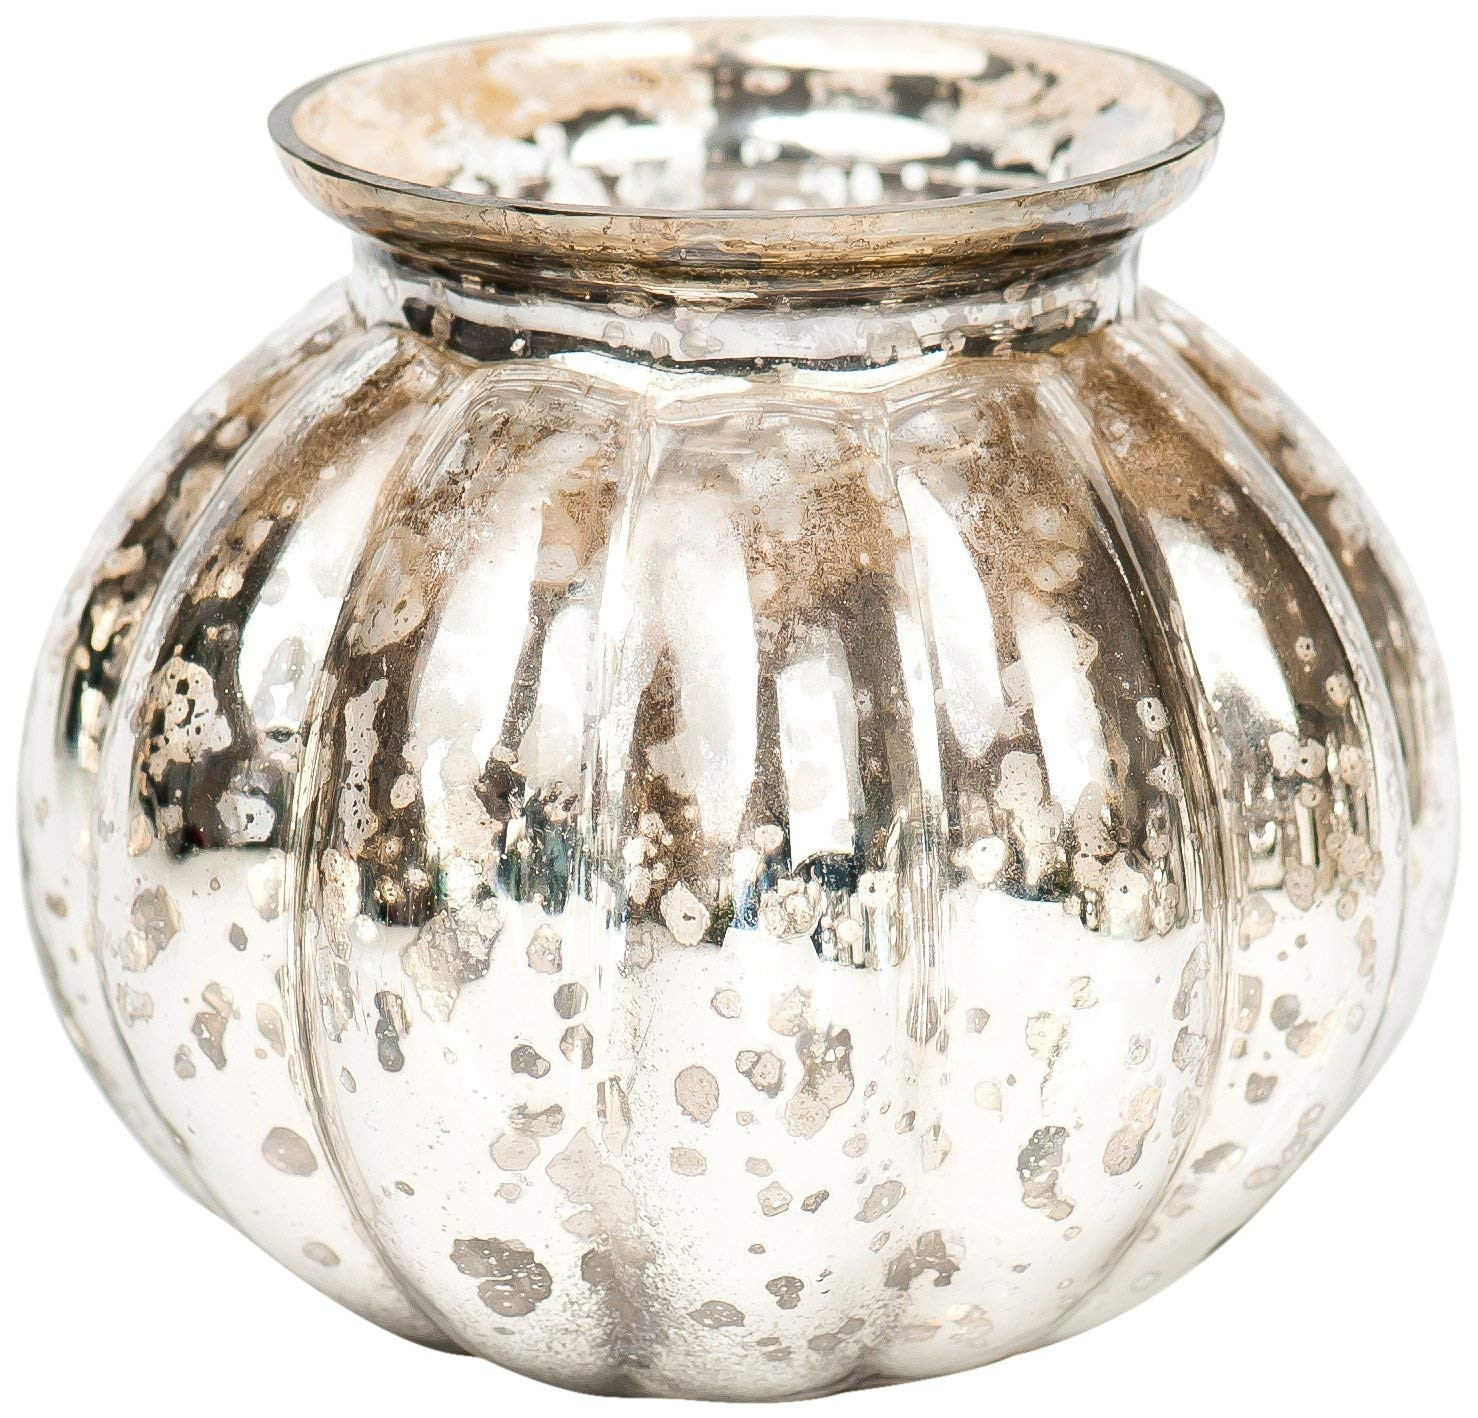 17 Ideal Cheap Mercury Glass Vases 2024 free download cheap mercury glass vases of insideretail mercury glass mini round vase silver 13 cm set of 3 with insideretail mercury glass mini round vase silver 13 cm set of 3 amazon co uk kitchen home